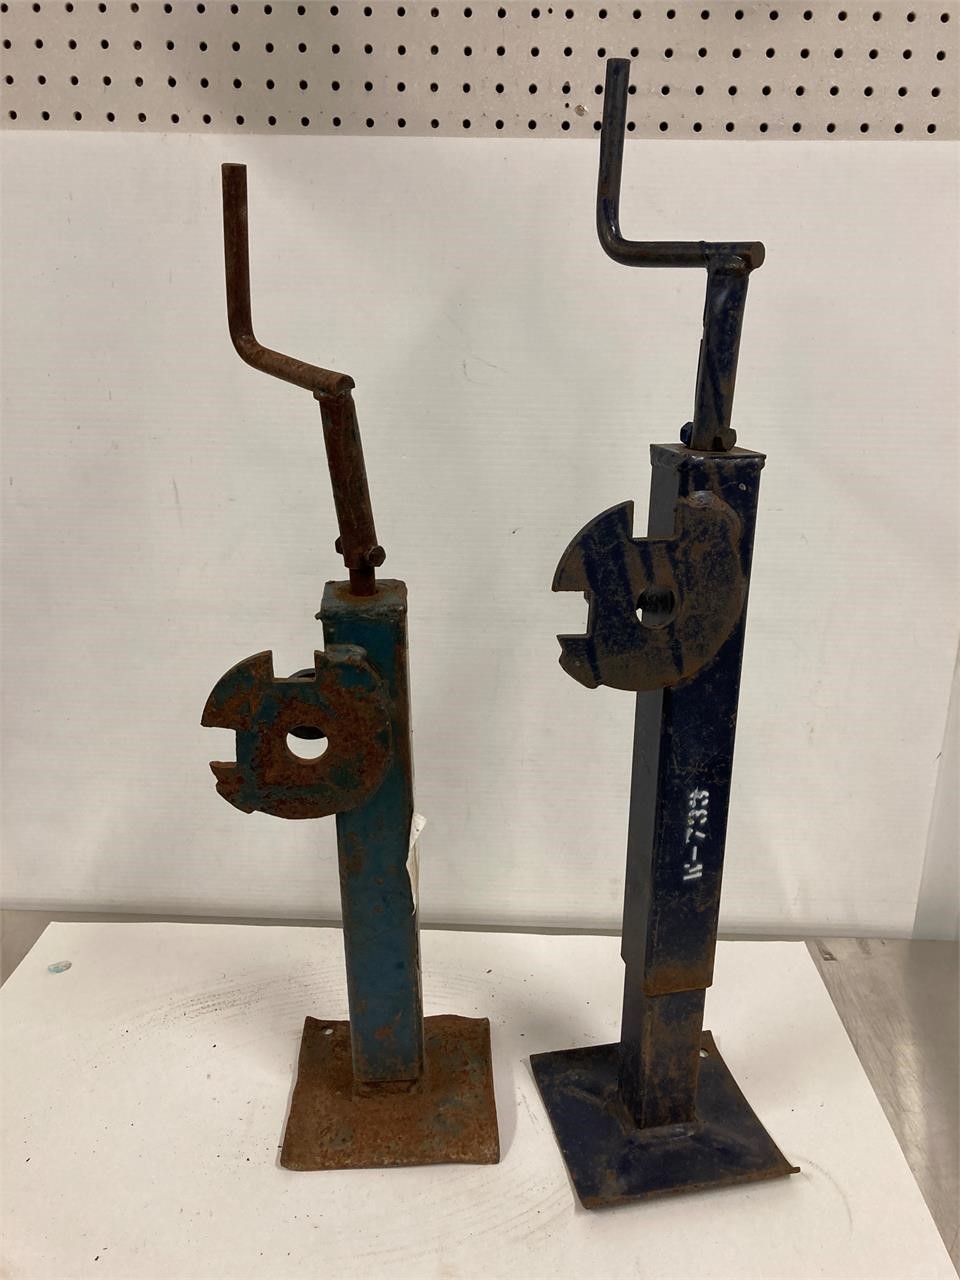 2 implement jacks. One works. One is seized